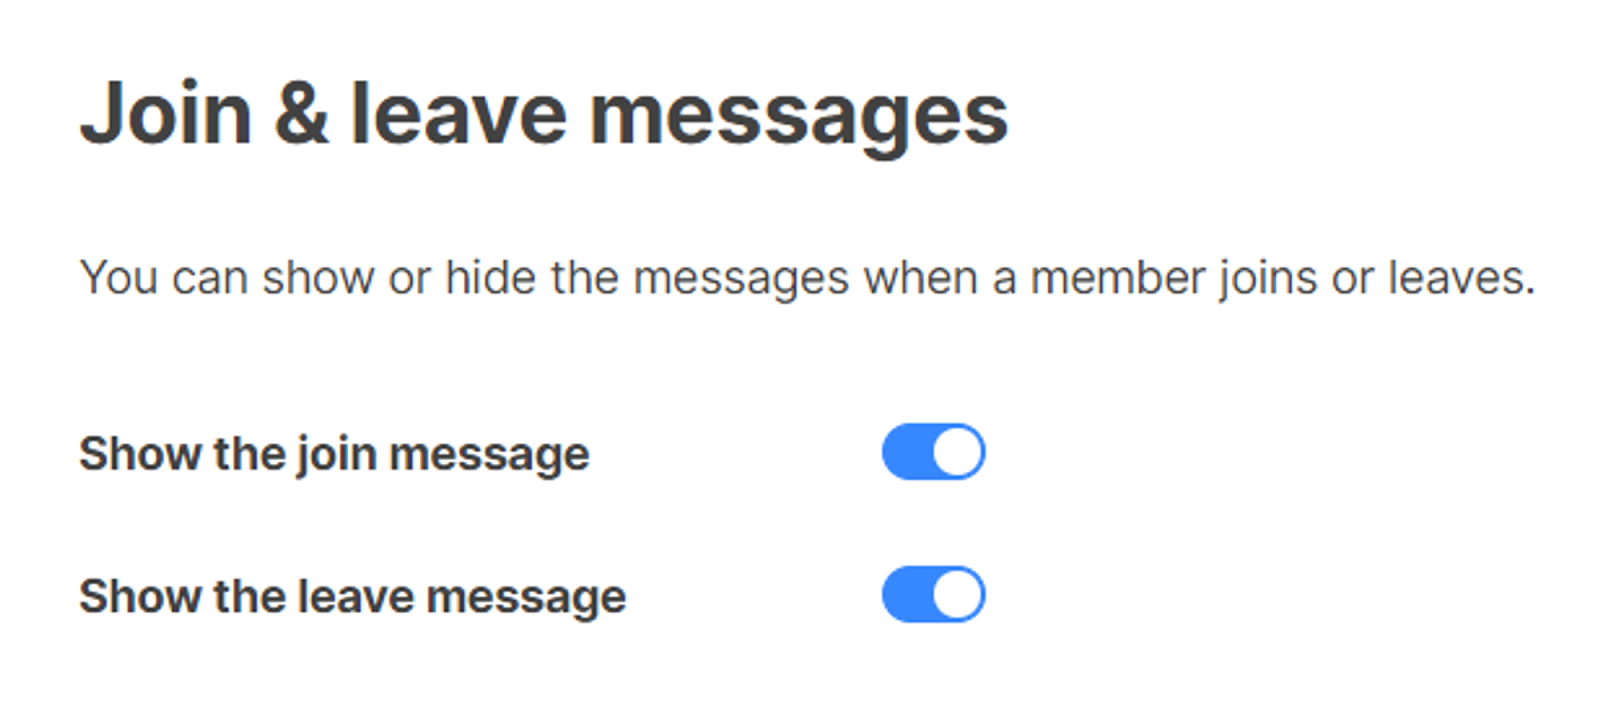 join&leave-message.png